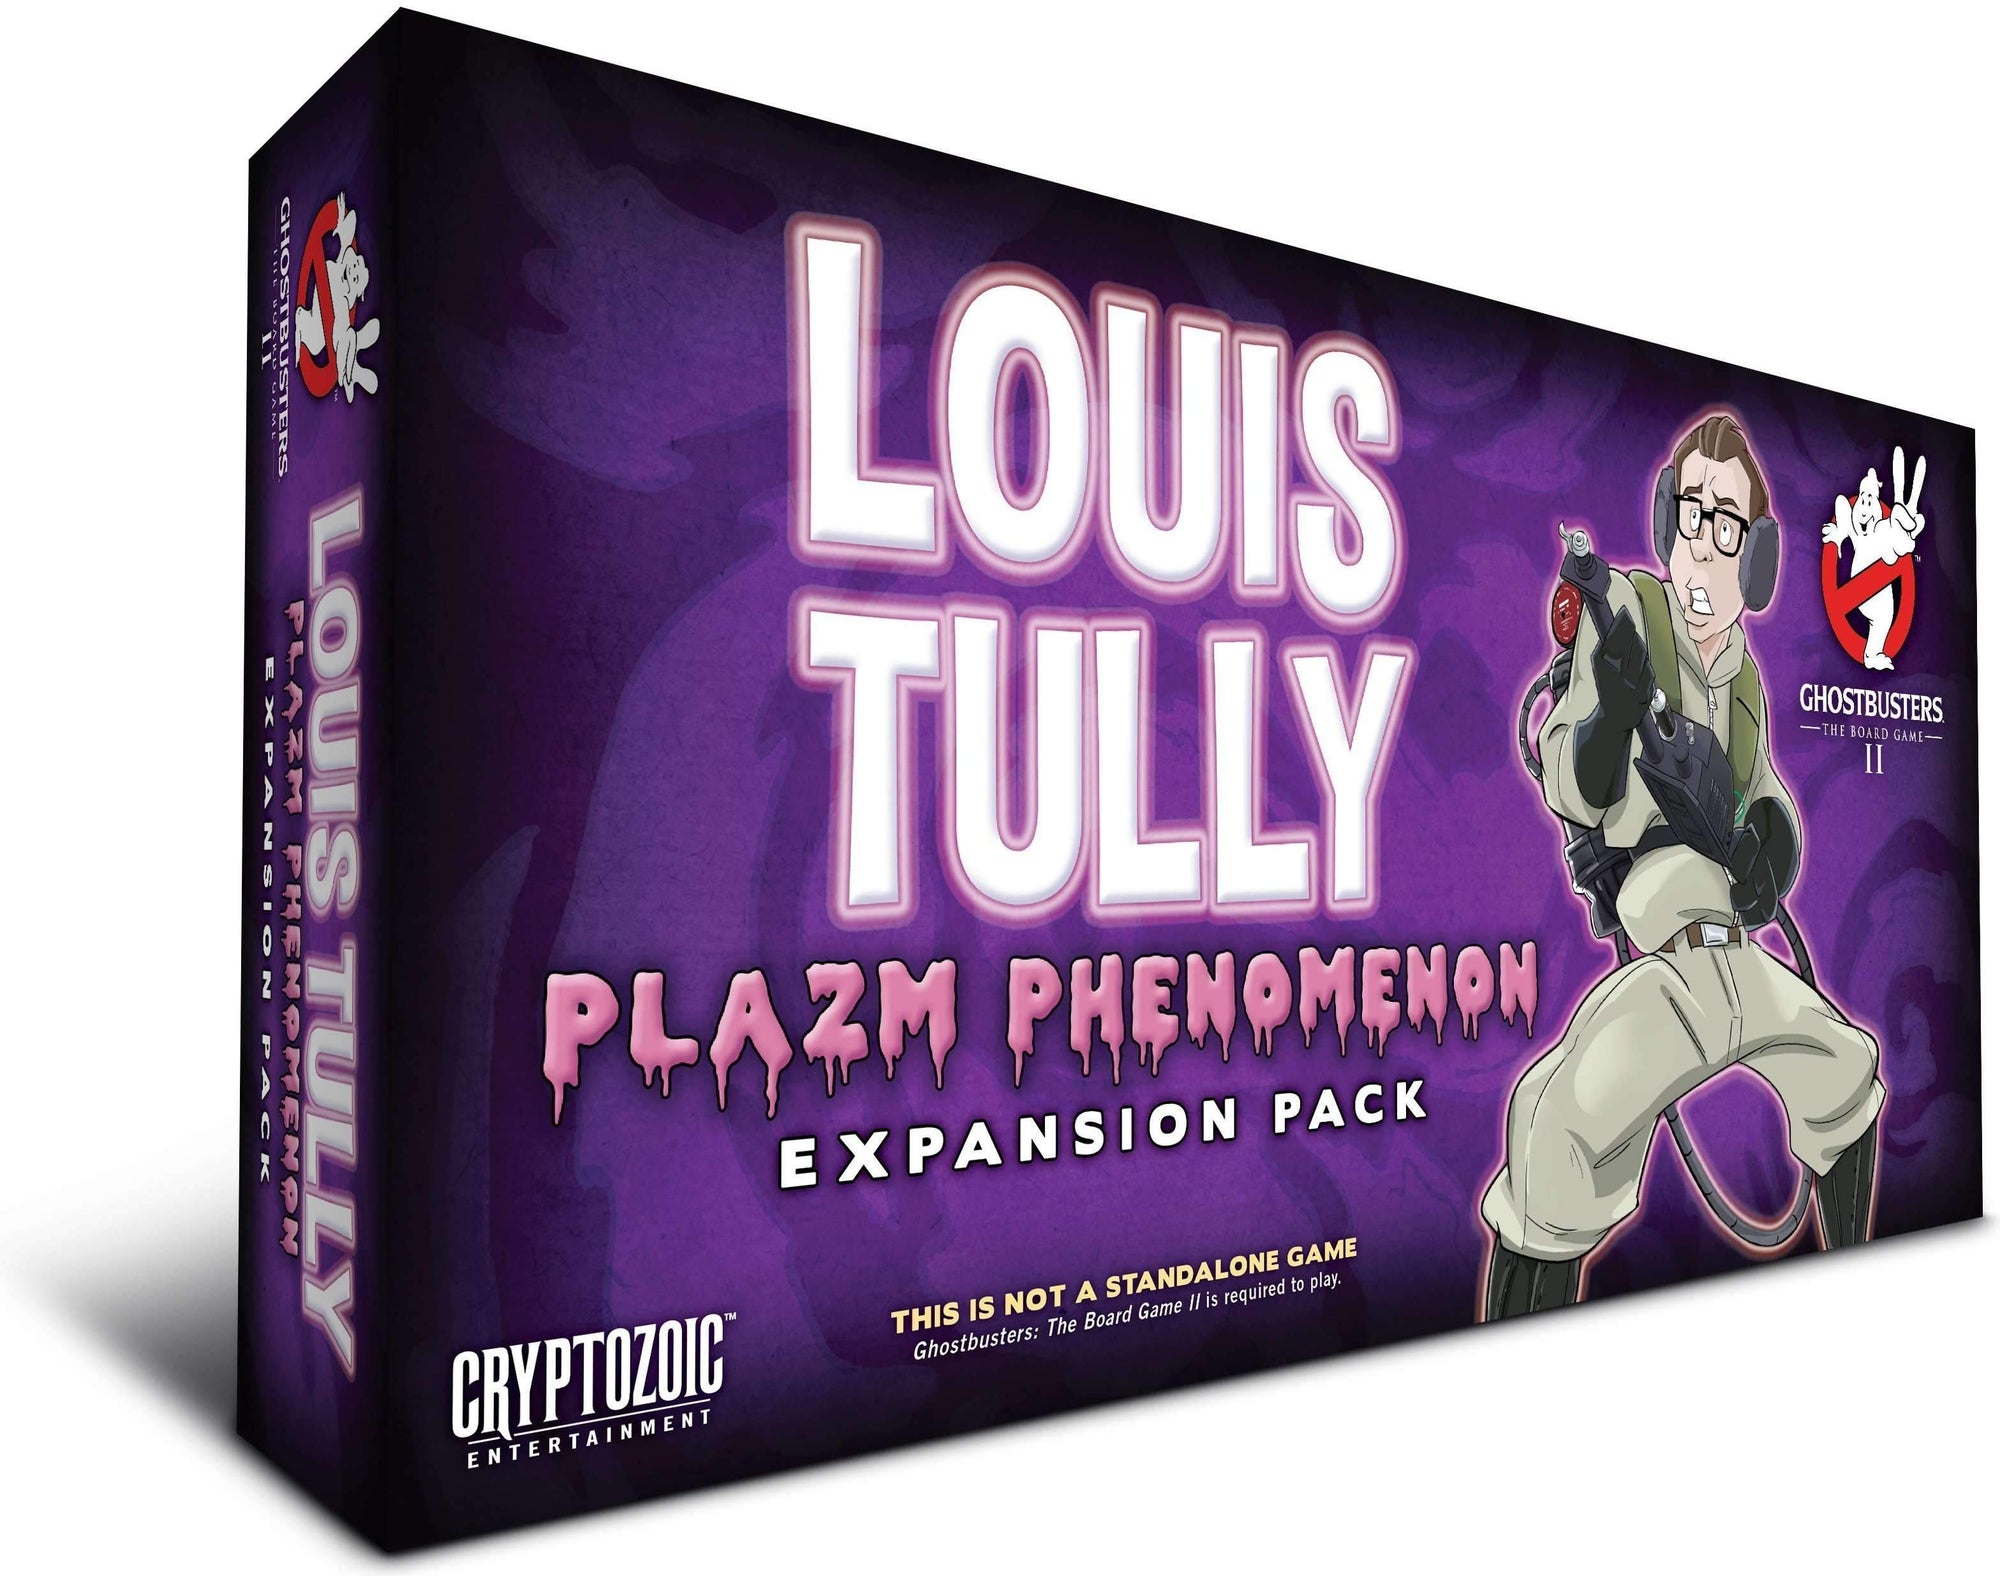 Ghostbusters II: Tully Expansion Retail Board Game Expansion Cryptozoic Entertainment